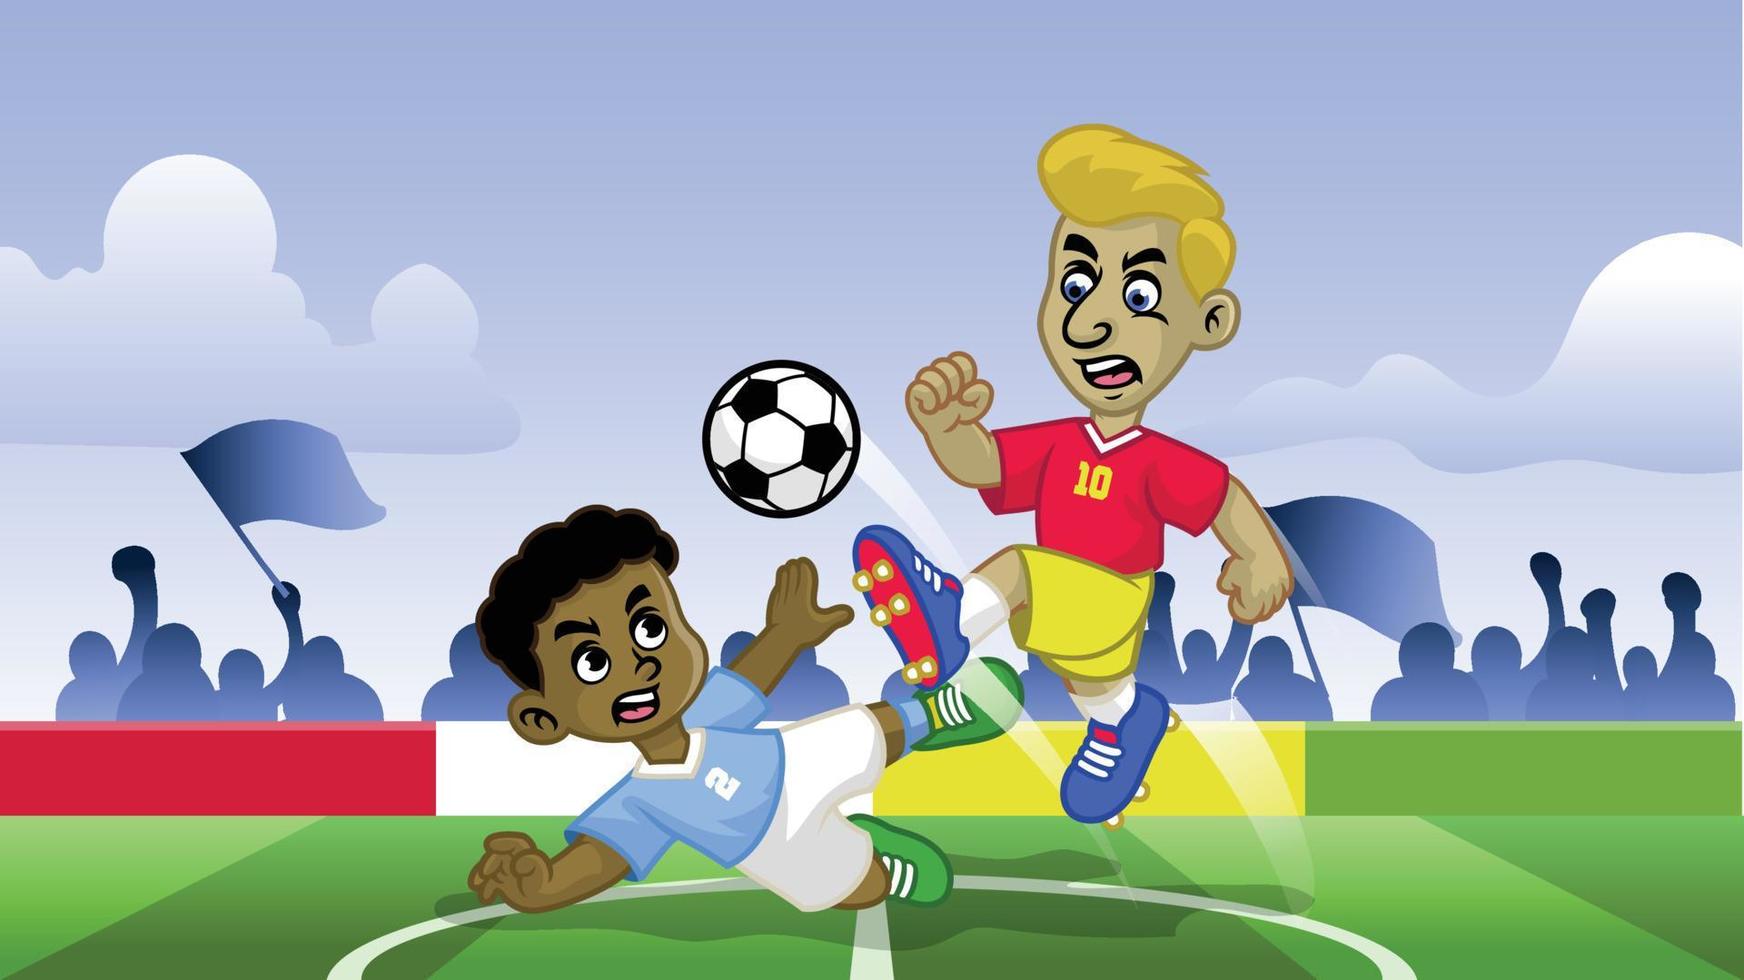 cartoon soccer kids playing soccer game in the field vector